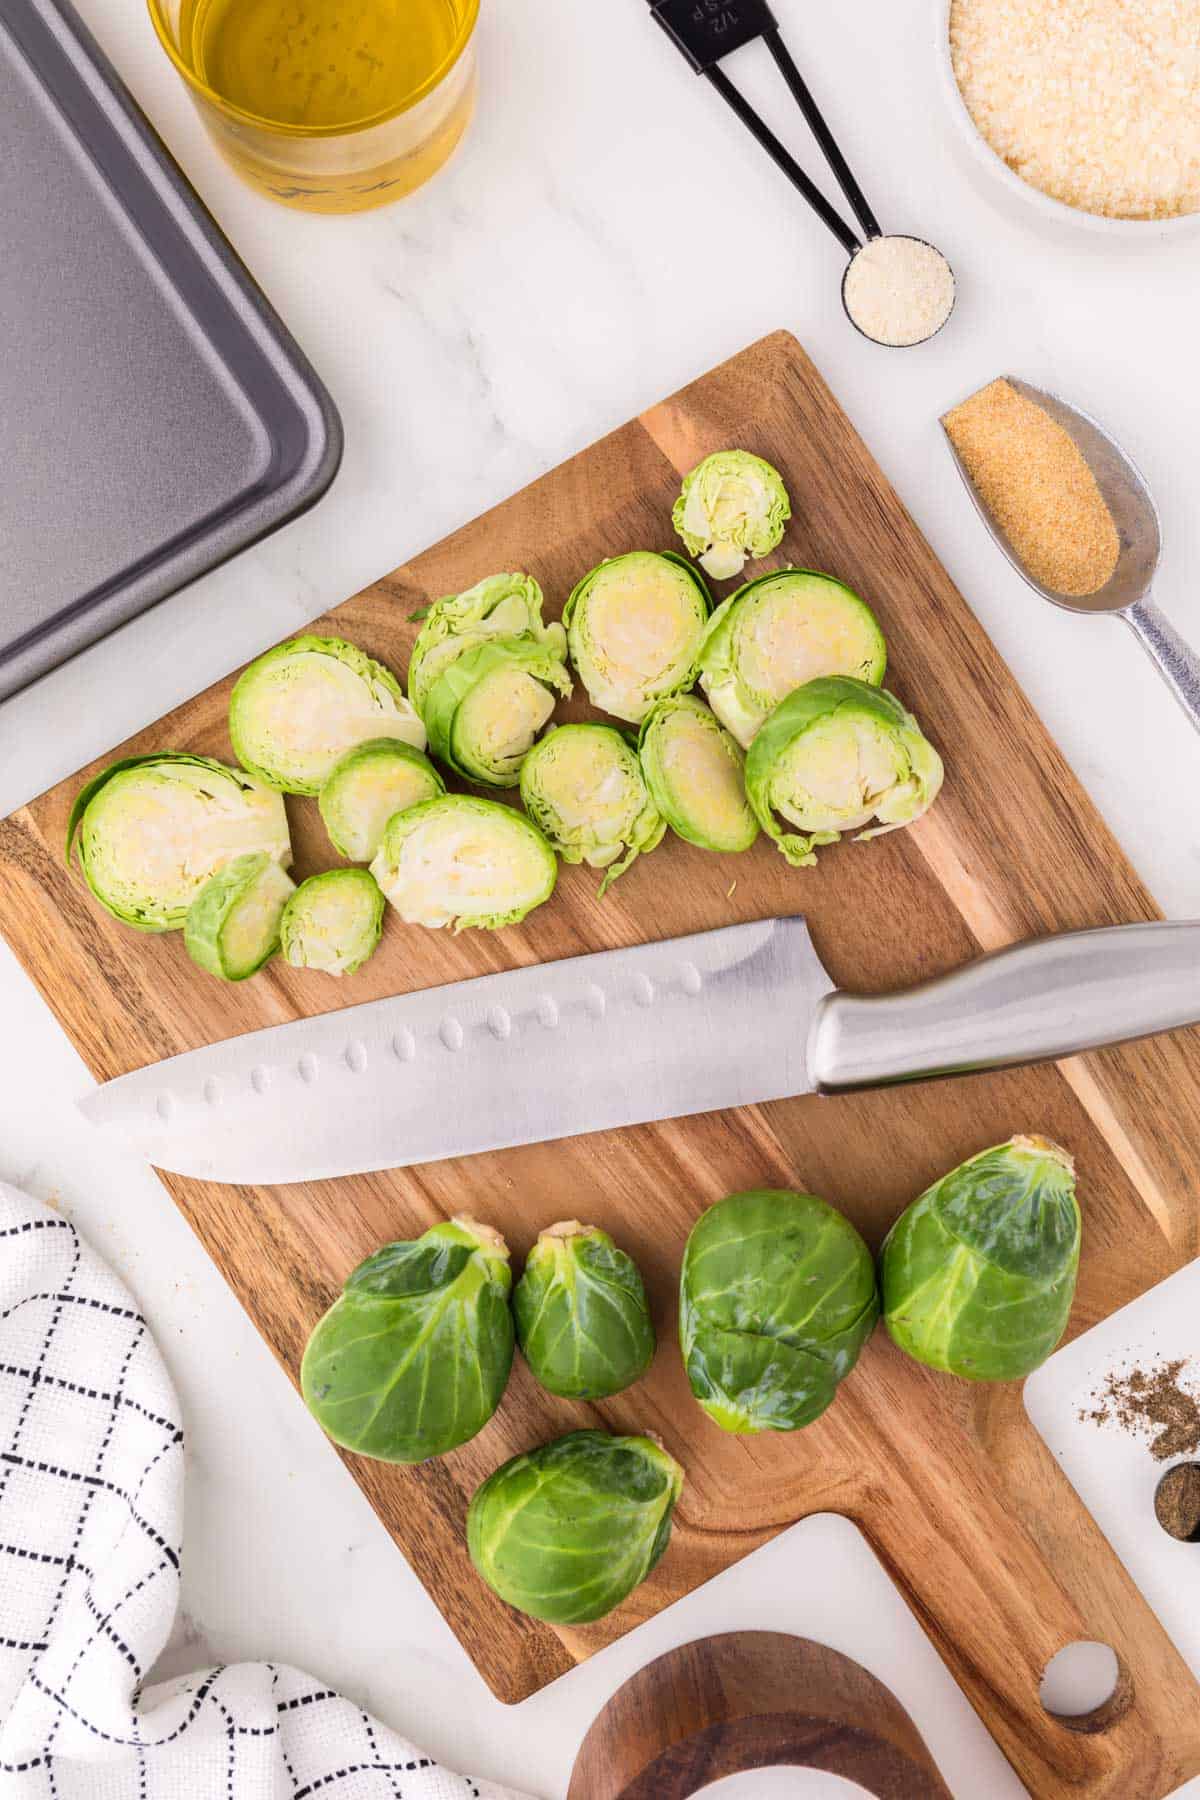 cutting the brussels sprouts into slices